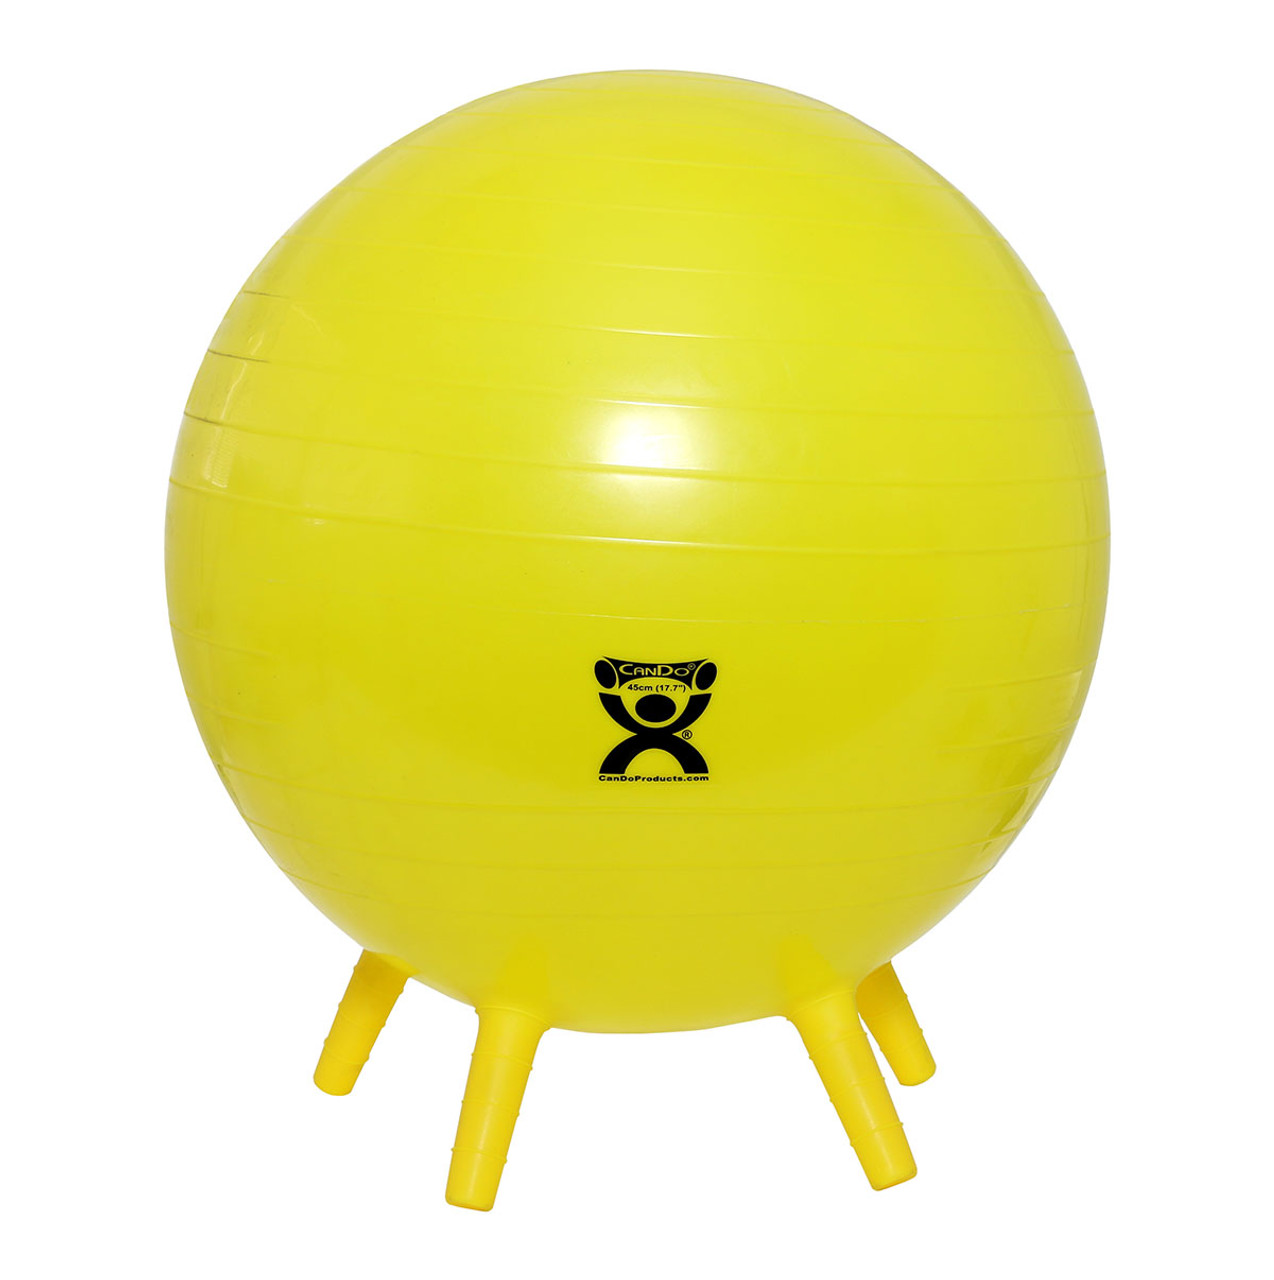 CanDo¨ Inflatable Exercise Ball - with Stability Feet - Yellow - 18" (45 cm)